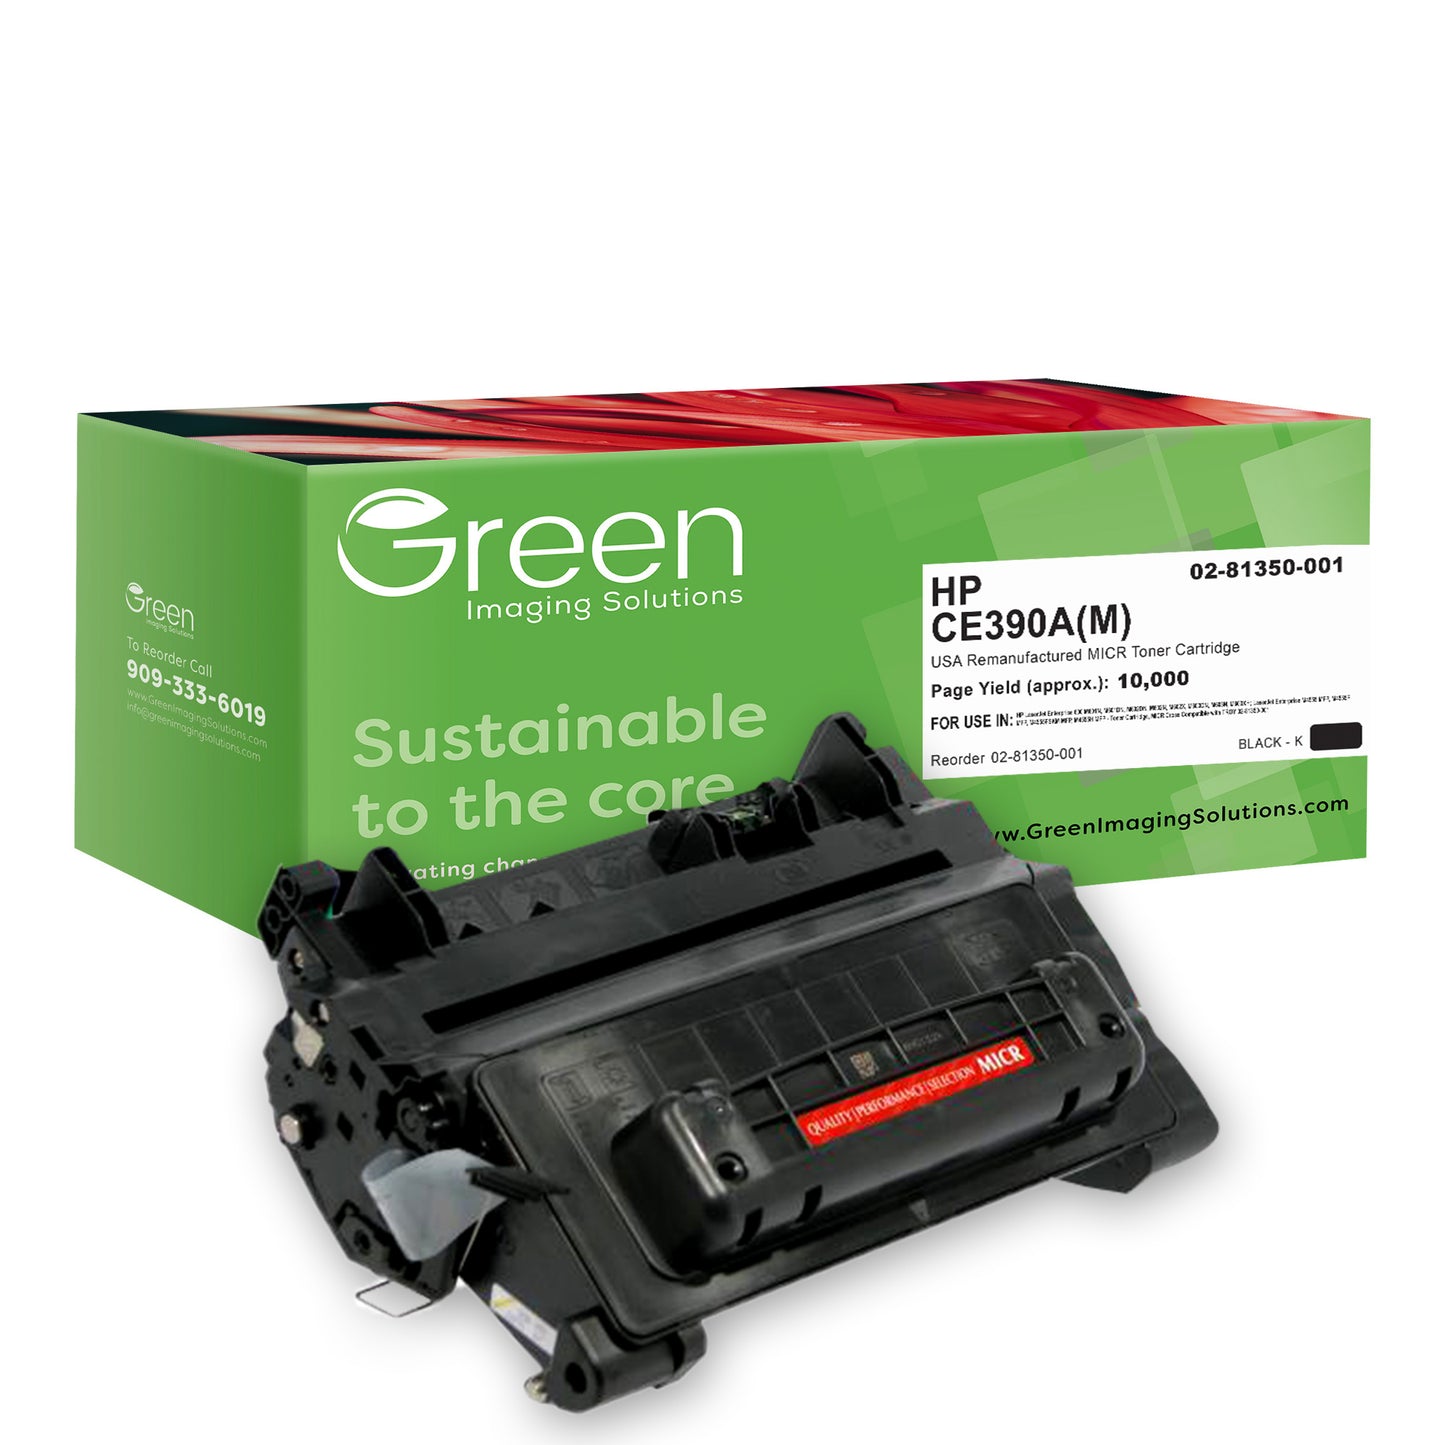 GIS USA Remanufactured MICR Toner Cartridge for HP CE390A, TROY 02-81350-001